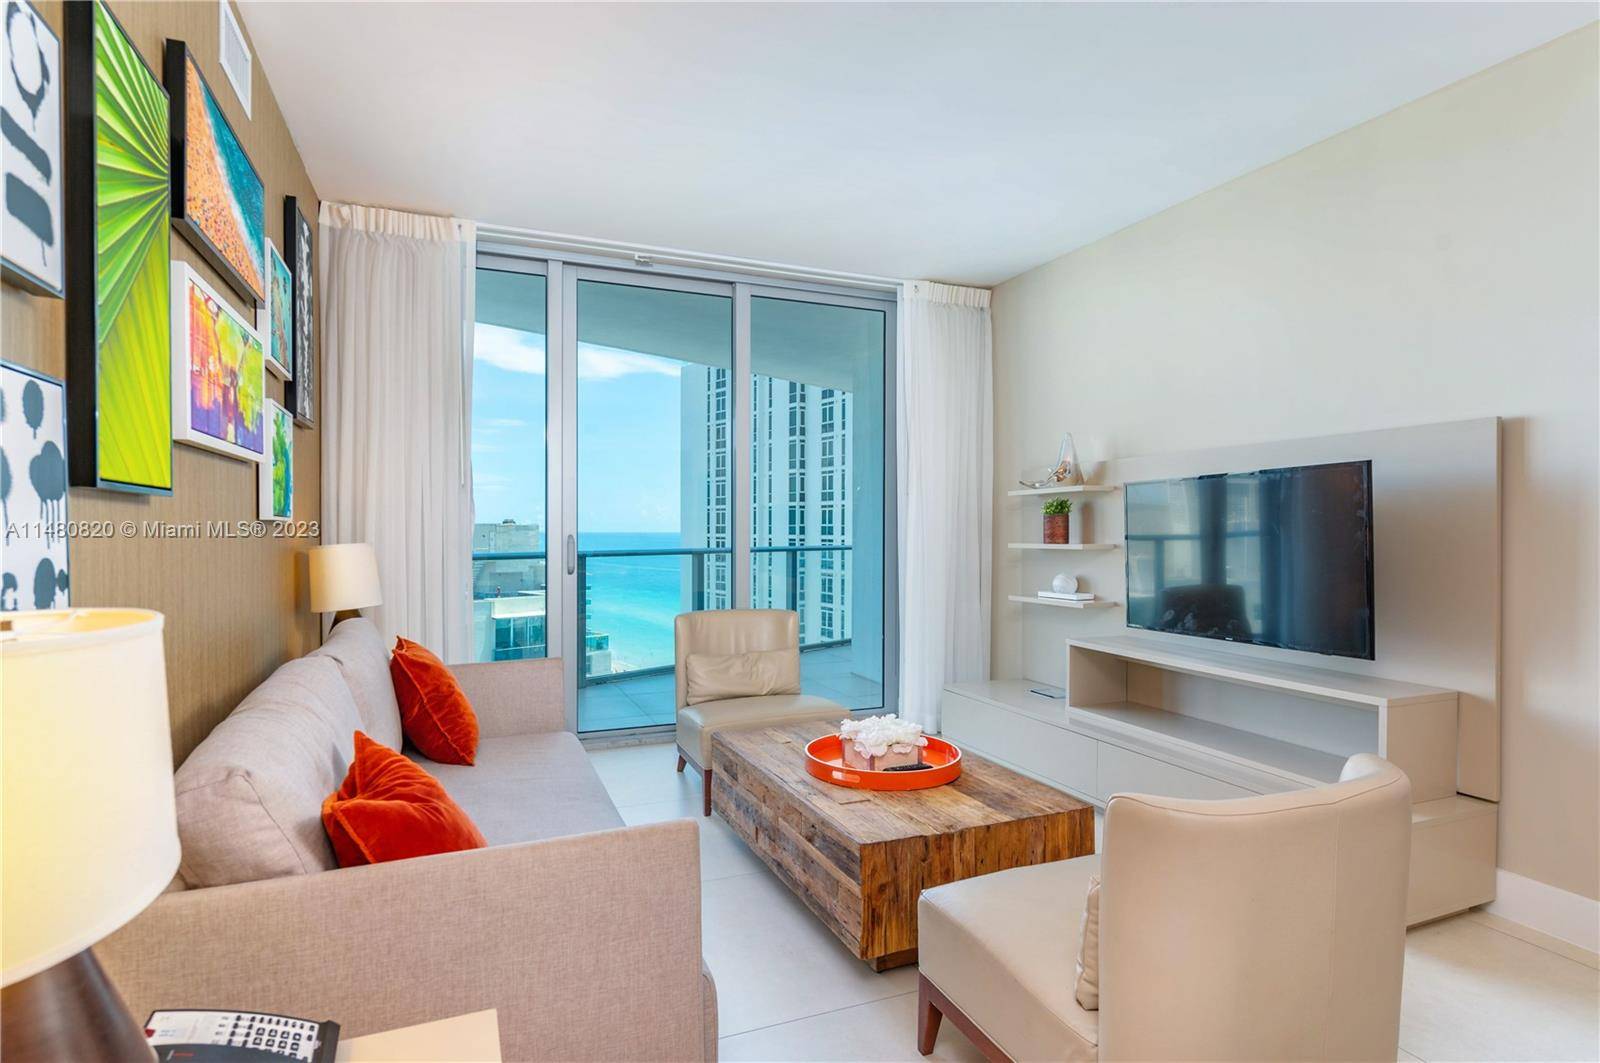 SPECTACULAR OPPORTUNITY TO MAKE IN AIRBNB BUSINESS TO STAY IN YOUR OWN, OCEAN VIEW, BEACHSIDE, Turn Key 2Br 2Ba CONDO in world class HYDE RESORT in Hollywood Beach !